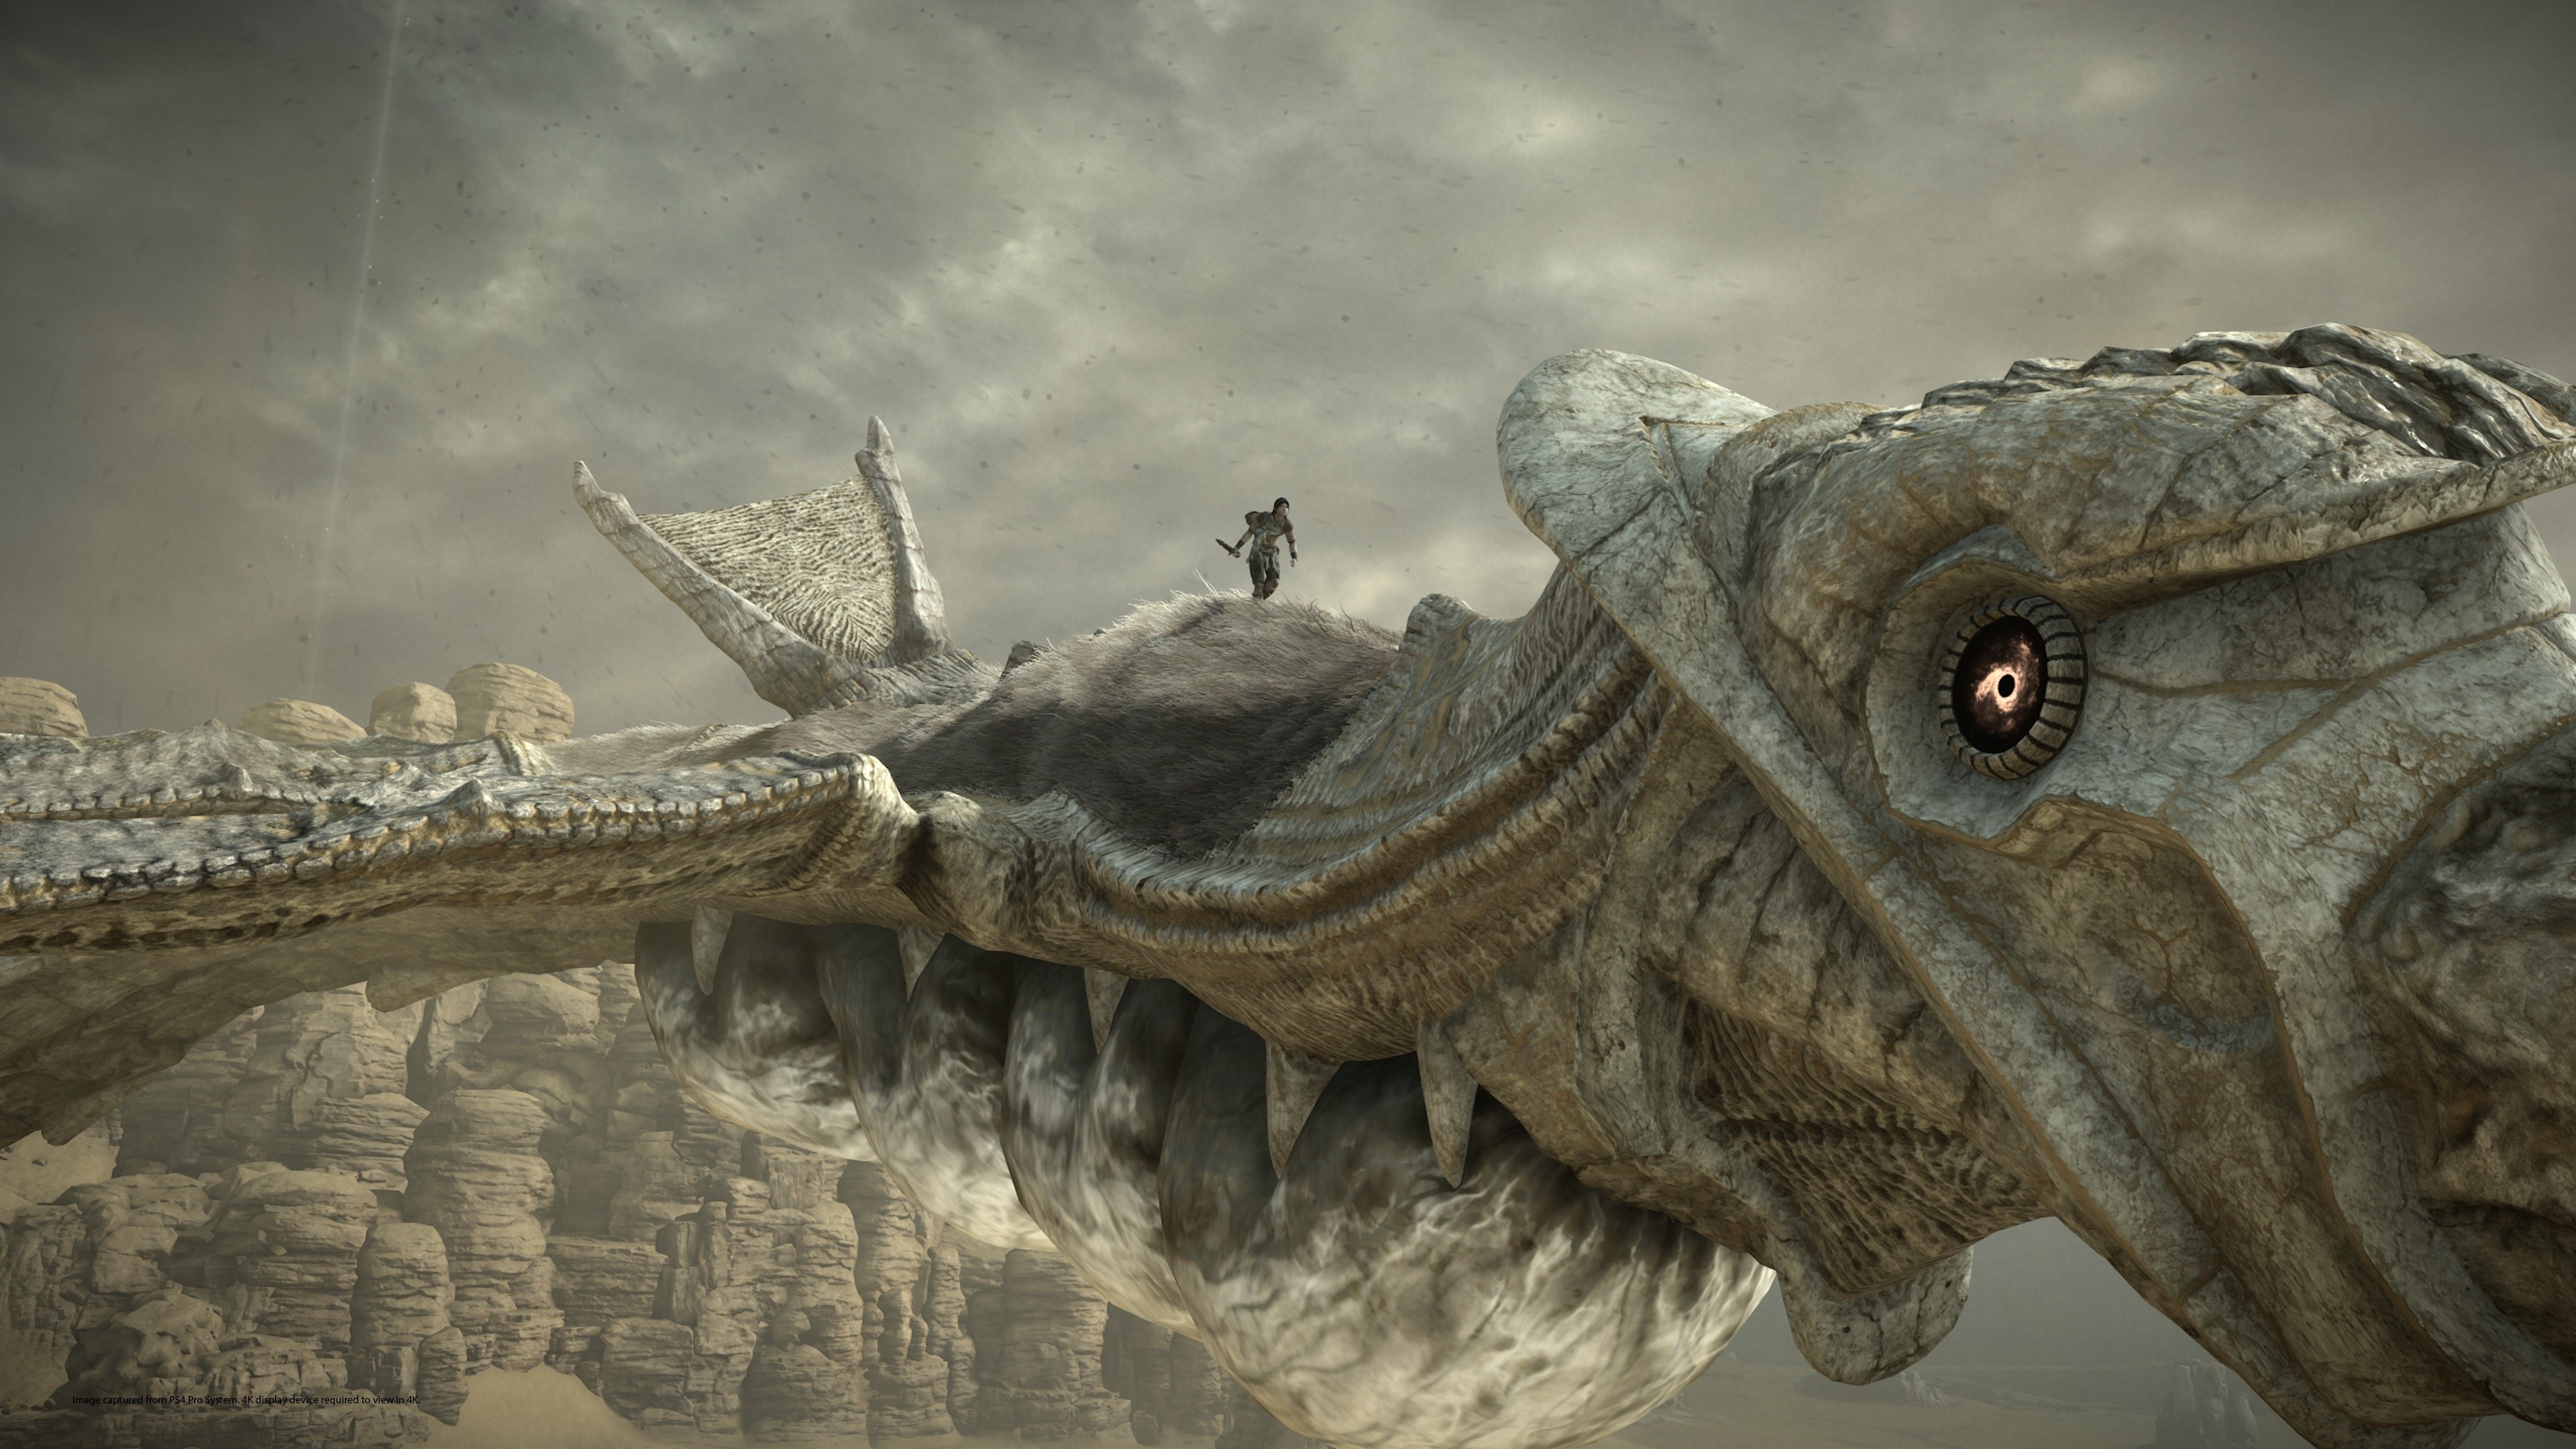 Shadow of the Colossus 1080P, 2K, 4K, 5K HD wallpapers free